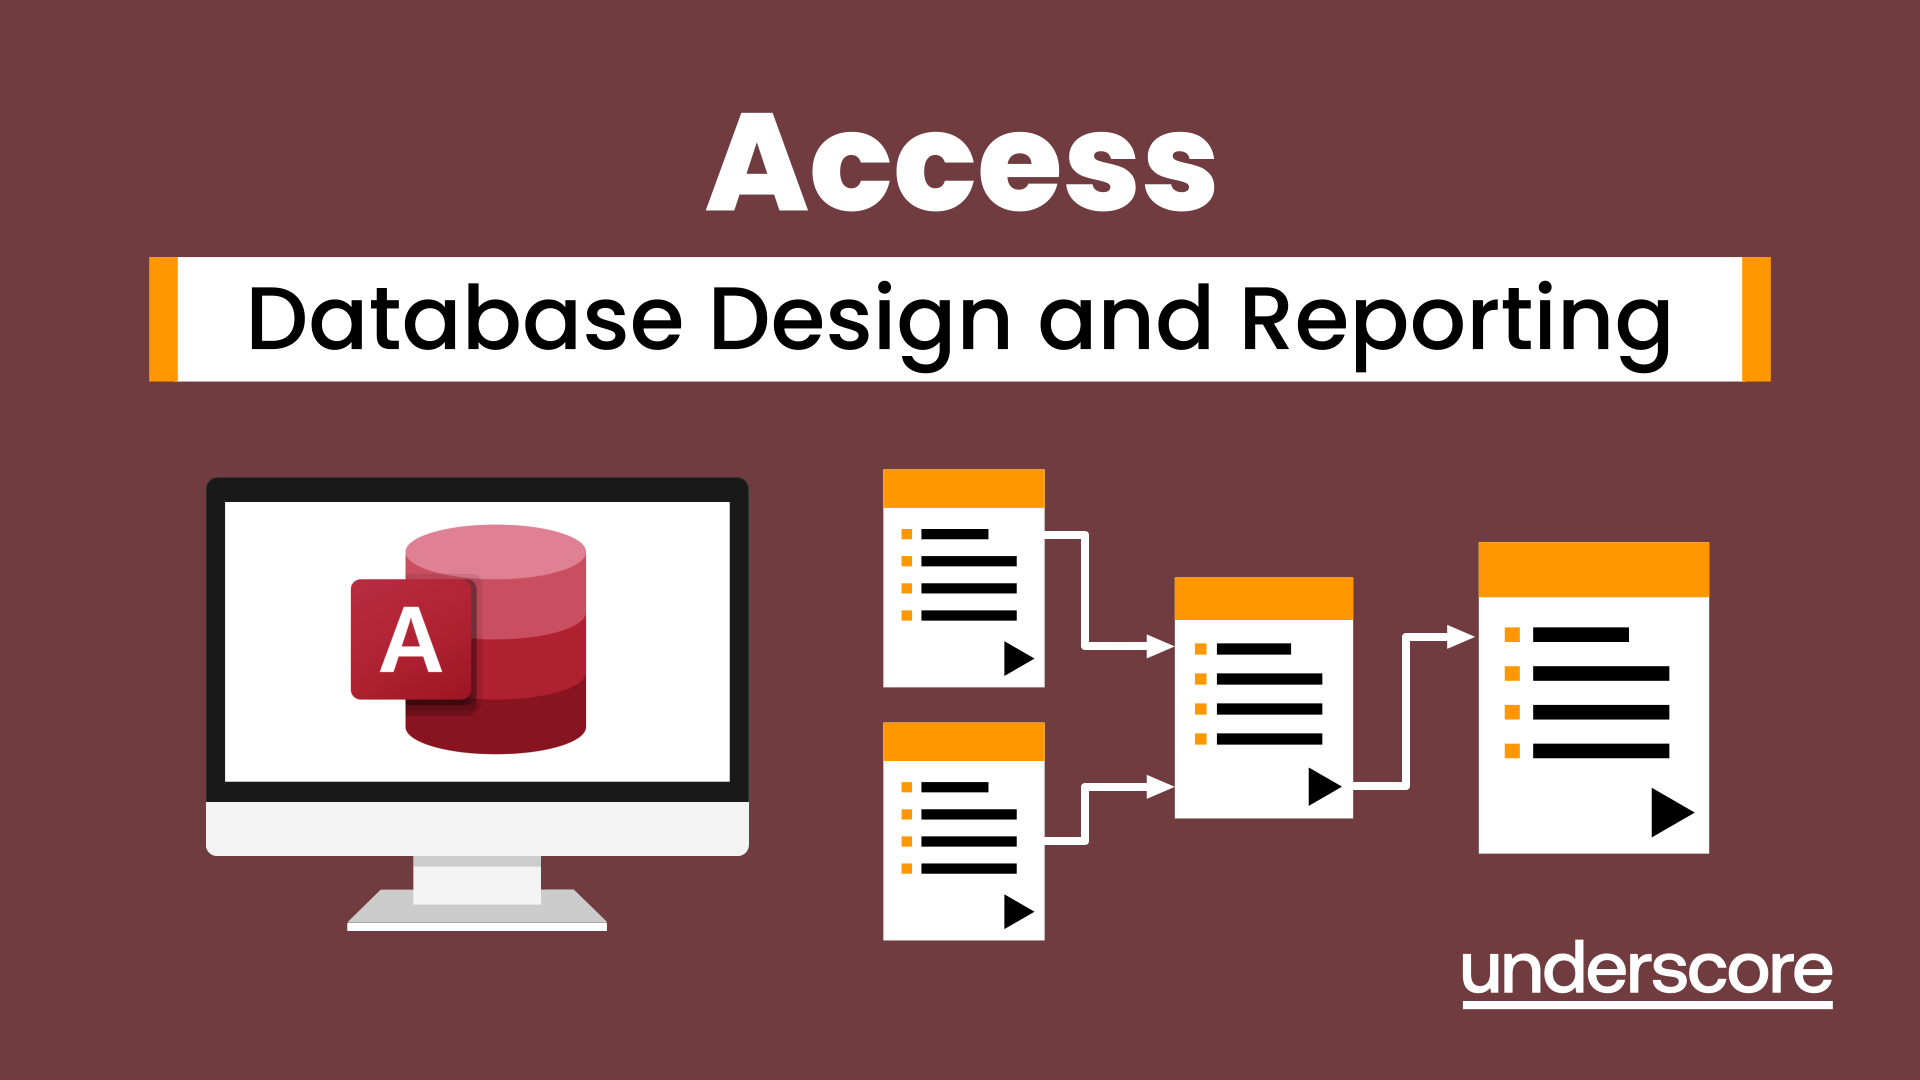 Access - Database Design and Reporting